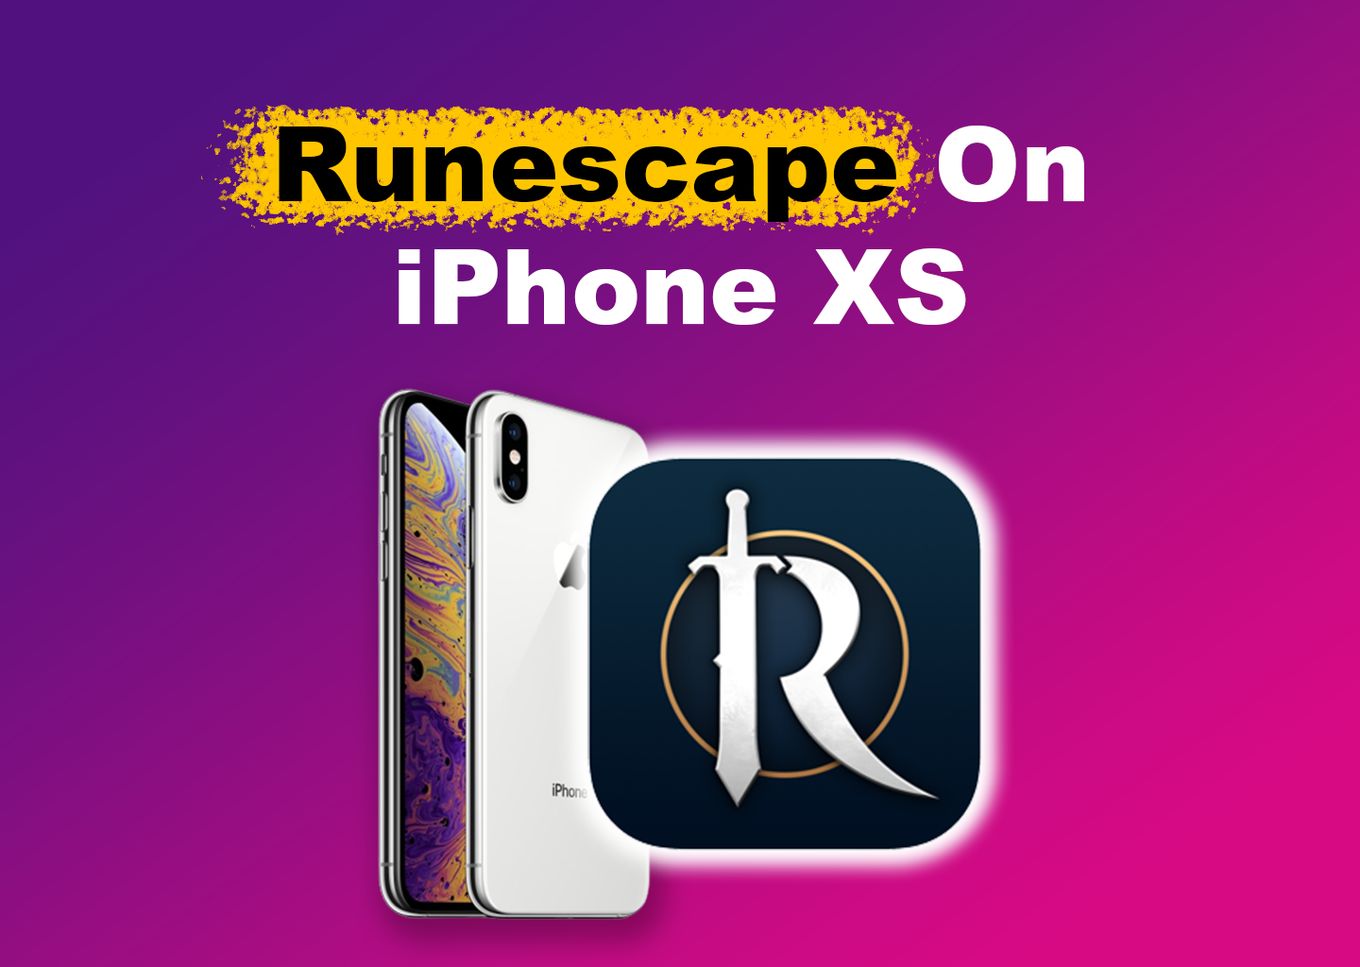 Runescape for Mobile on iPhone XS [What You Need to Know] - Alvaro Trigo's  Blog